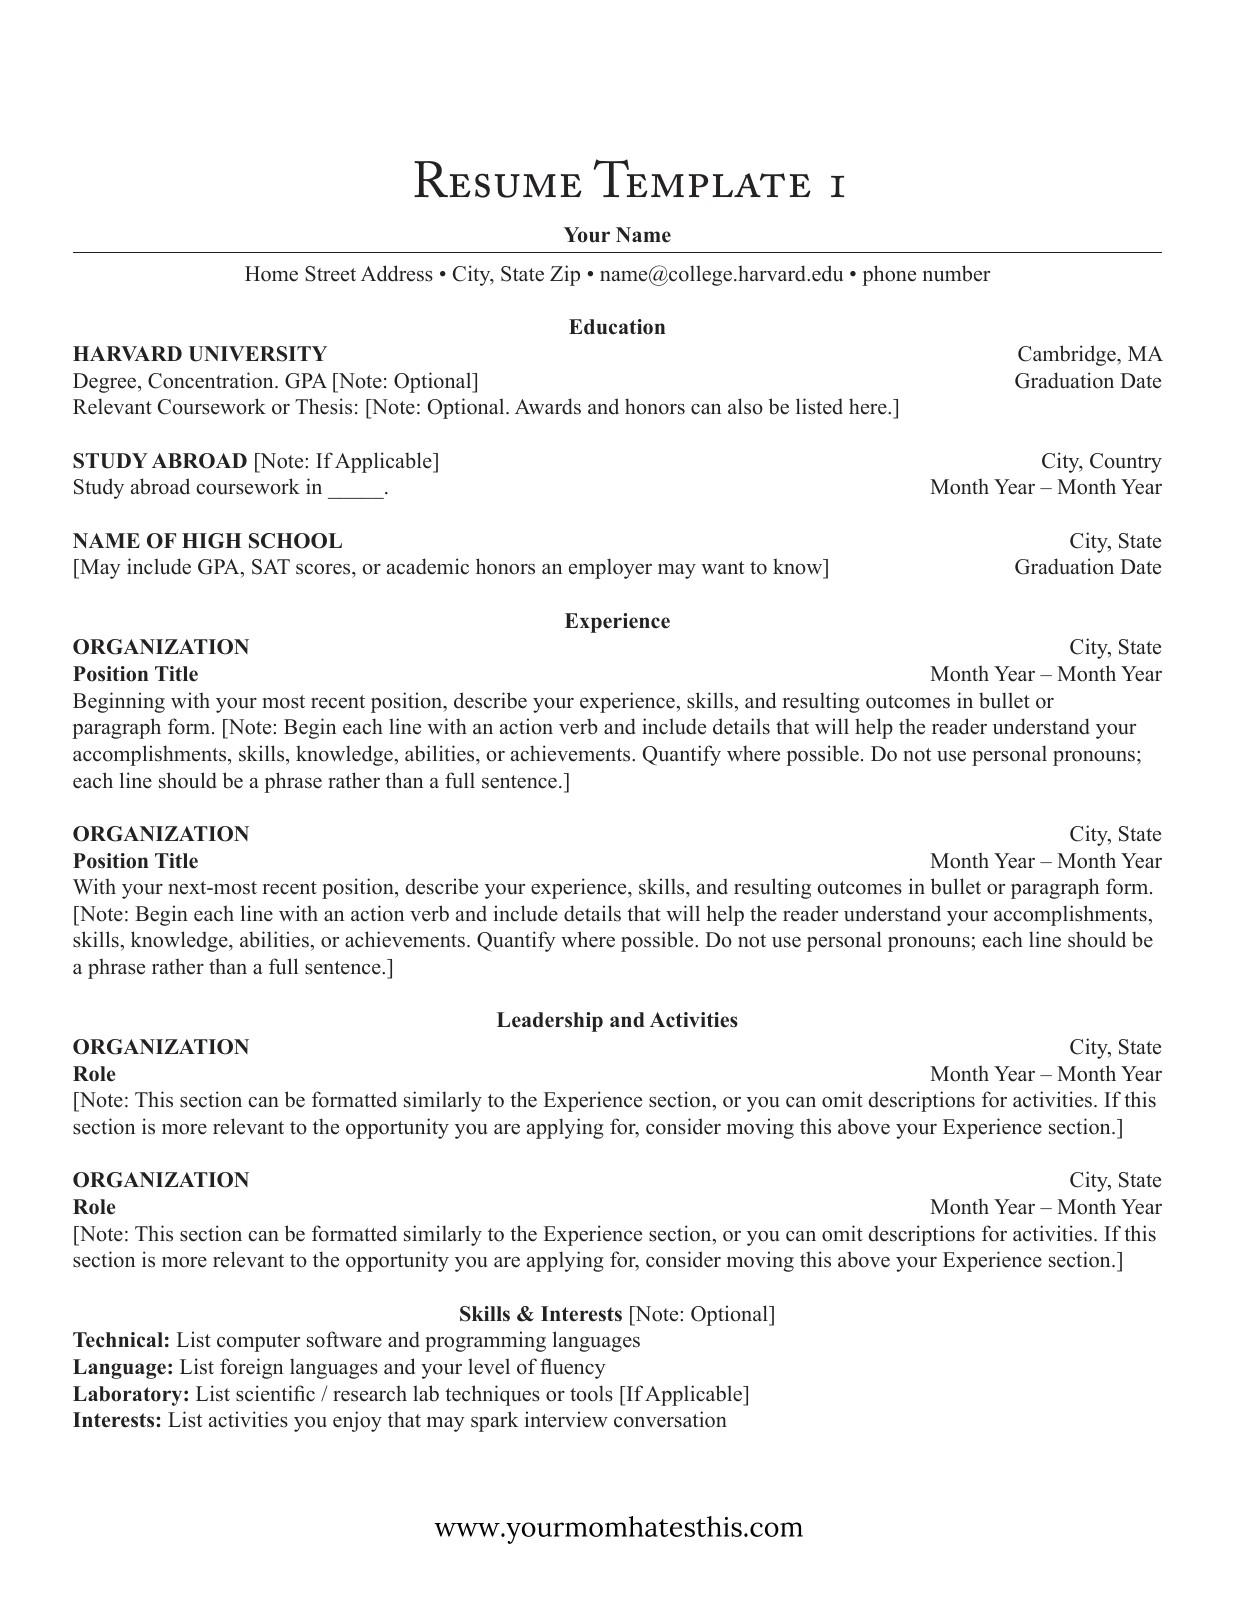 resume personal information